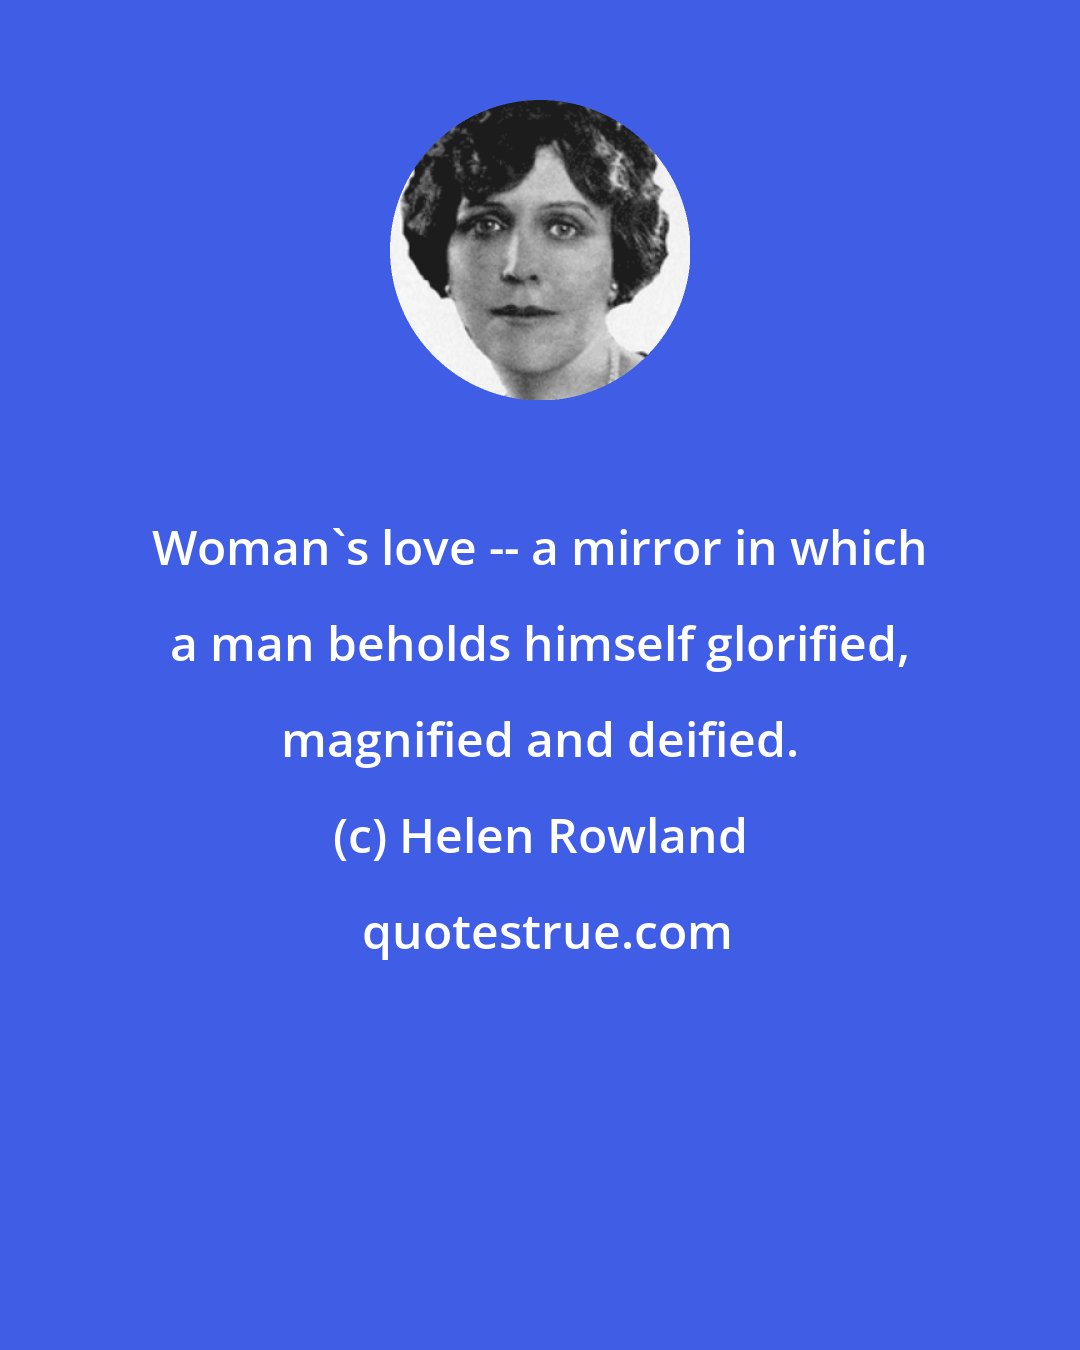 Helen Rowland: Woman's love -- a mirror in which a man beholds himself glorified, magnified and deified.